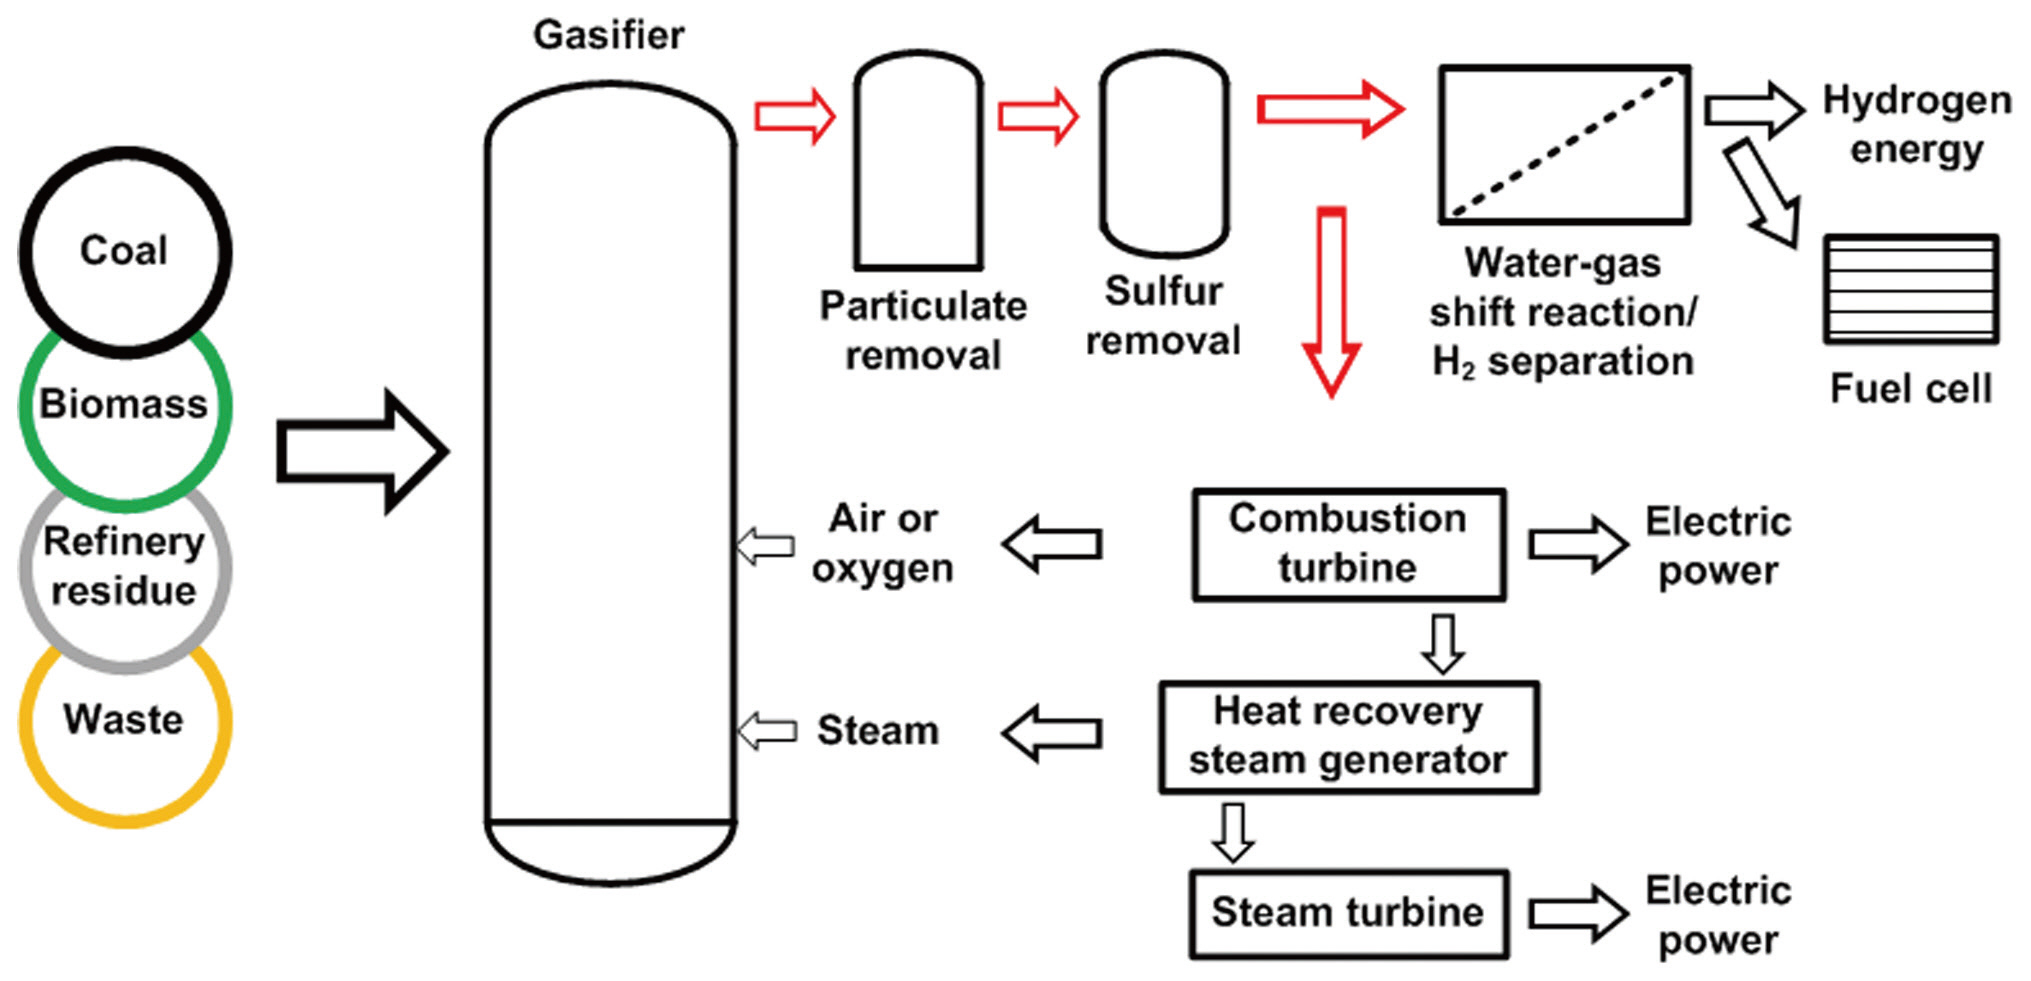 Schematic diagram of the integrated gasification combined cycle (IGCC) process [2].